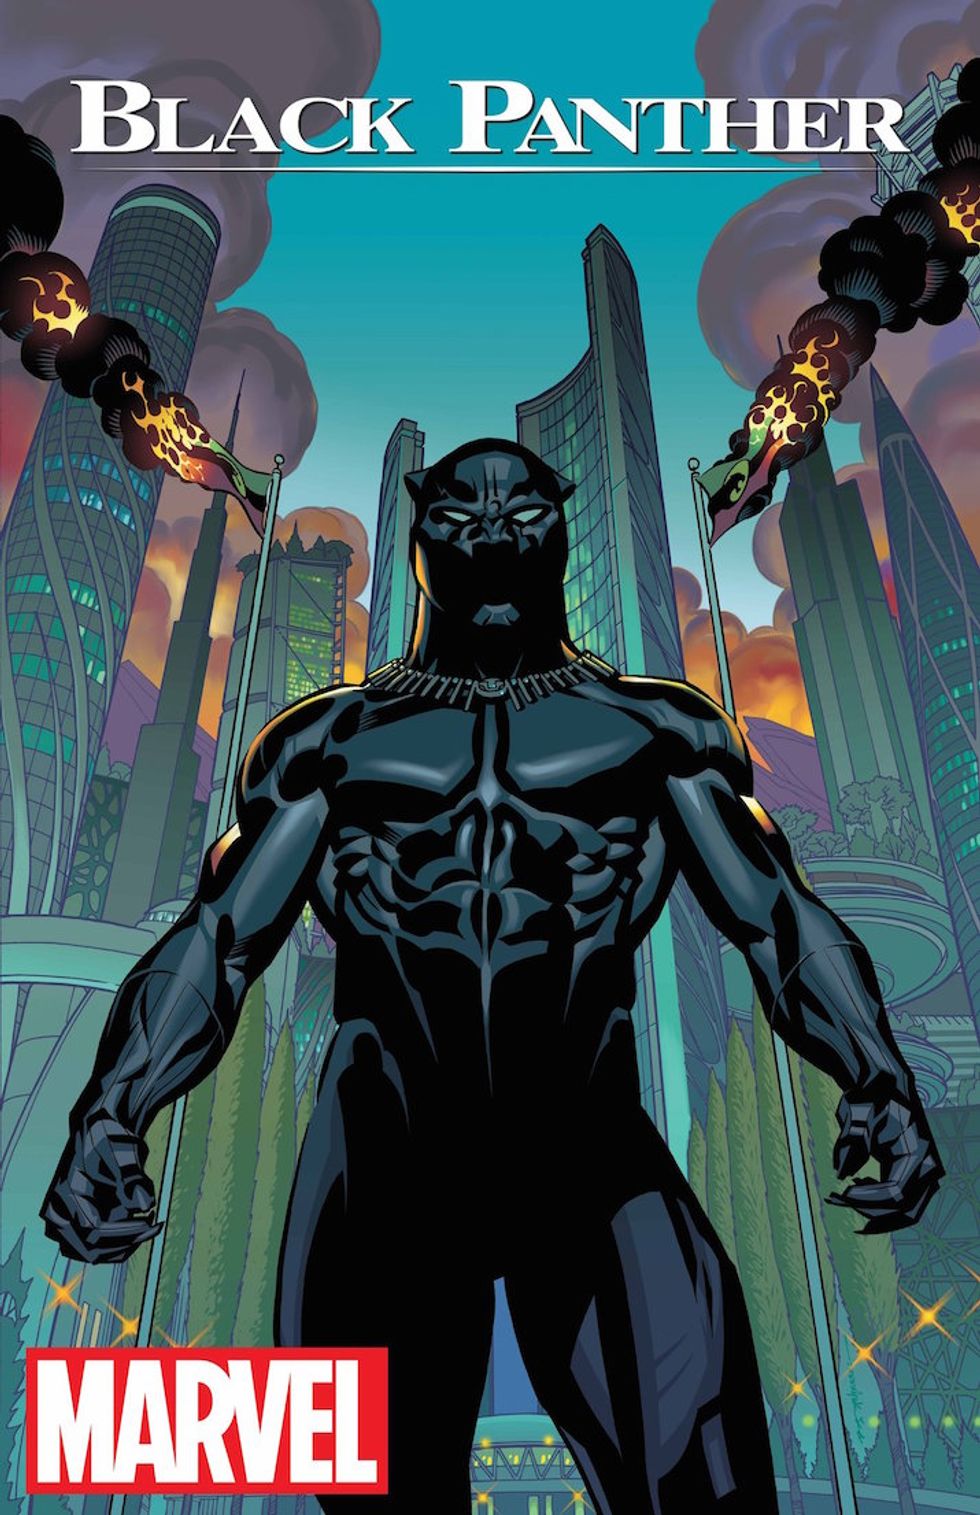 In Major Comic Book News: Ta-Nehisi Coates Tapped To Pen Marvel's Upcoming Black Panther Series